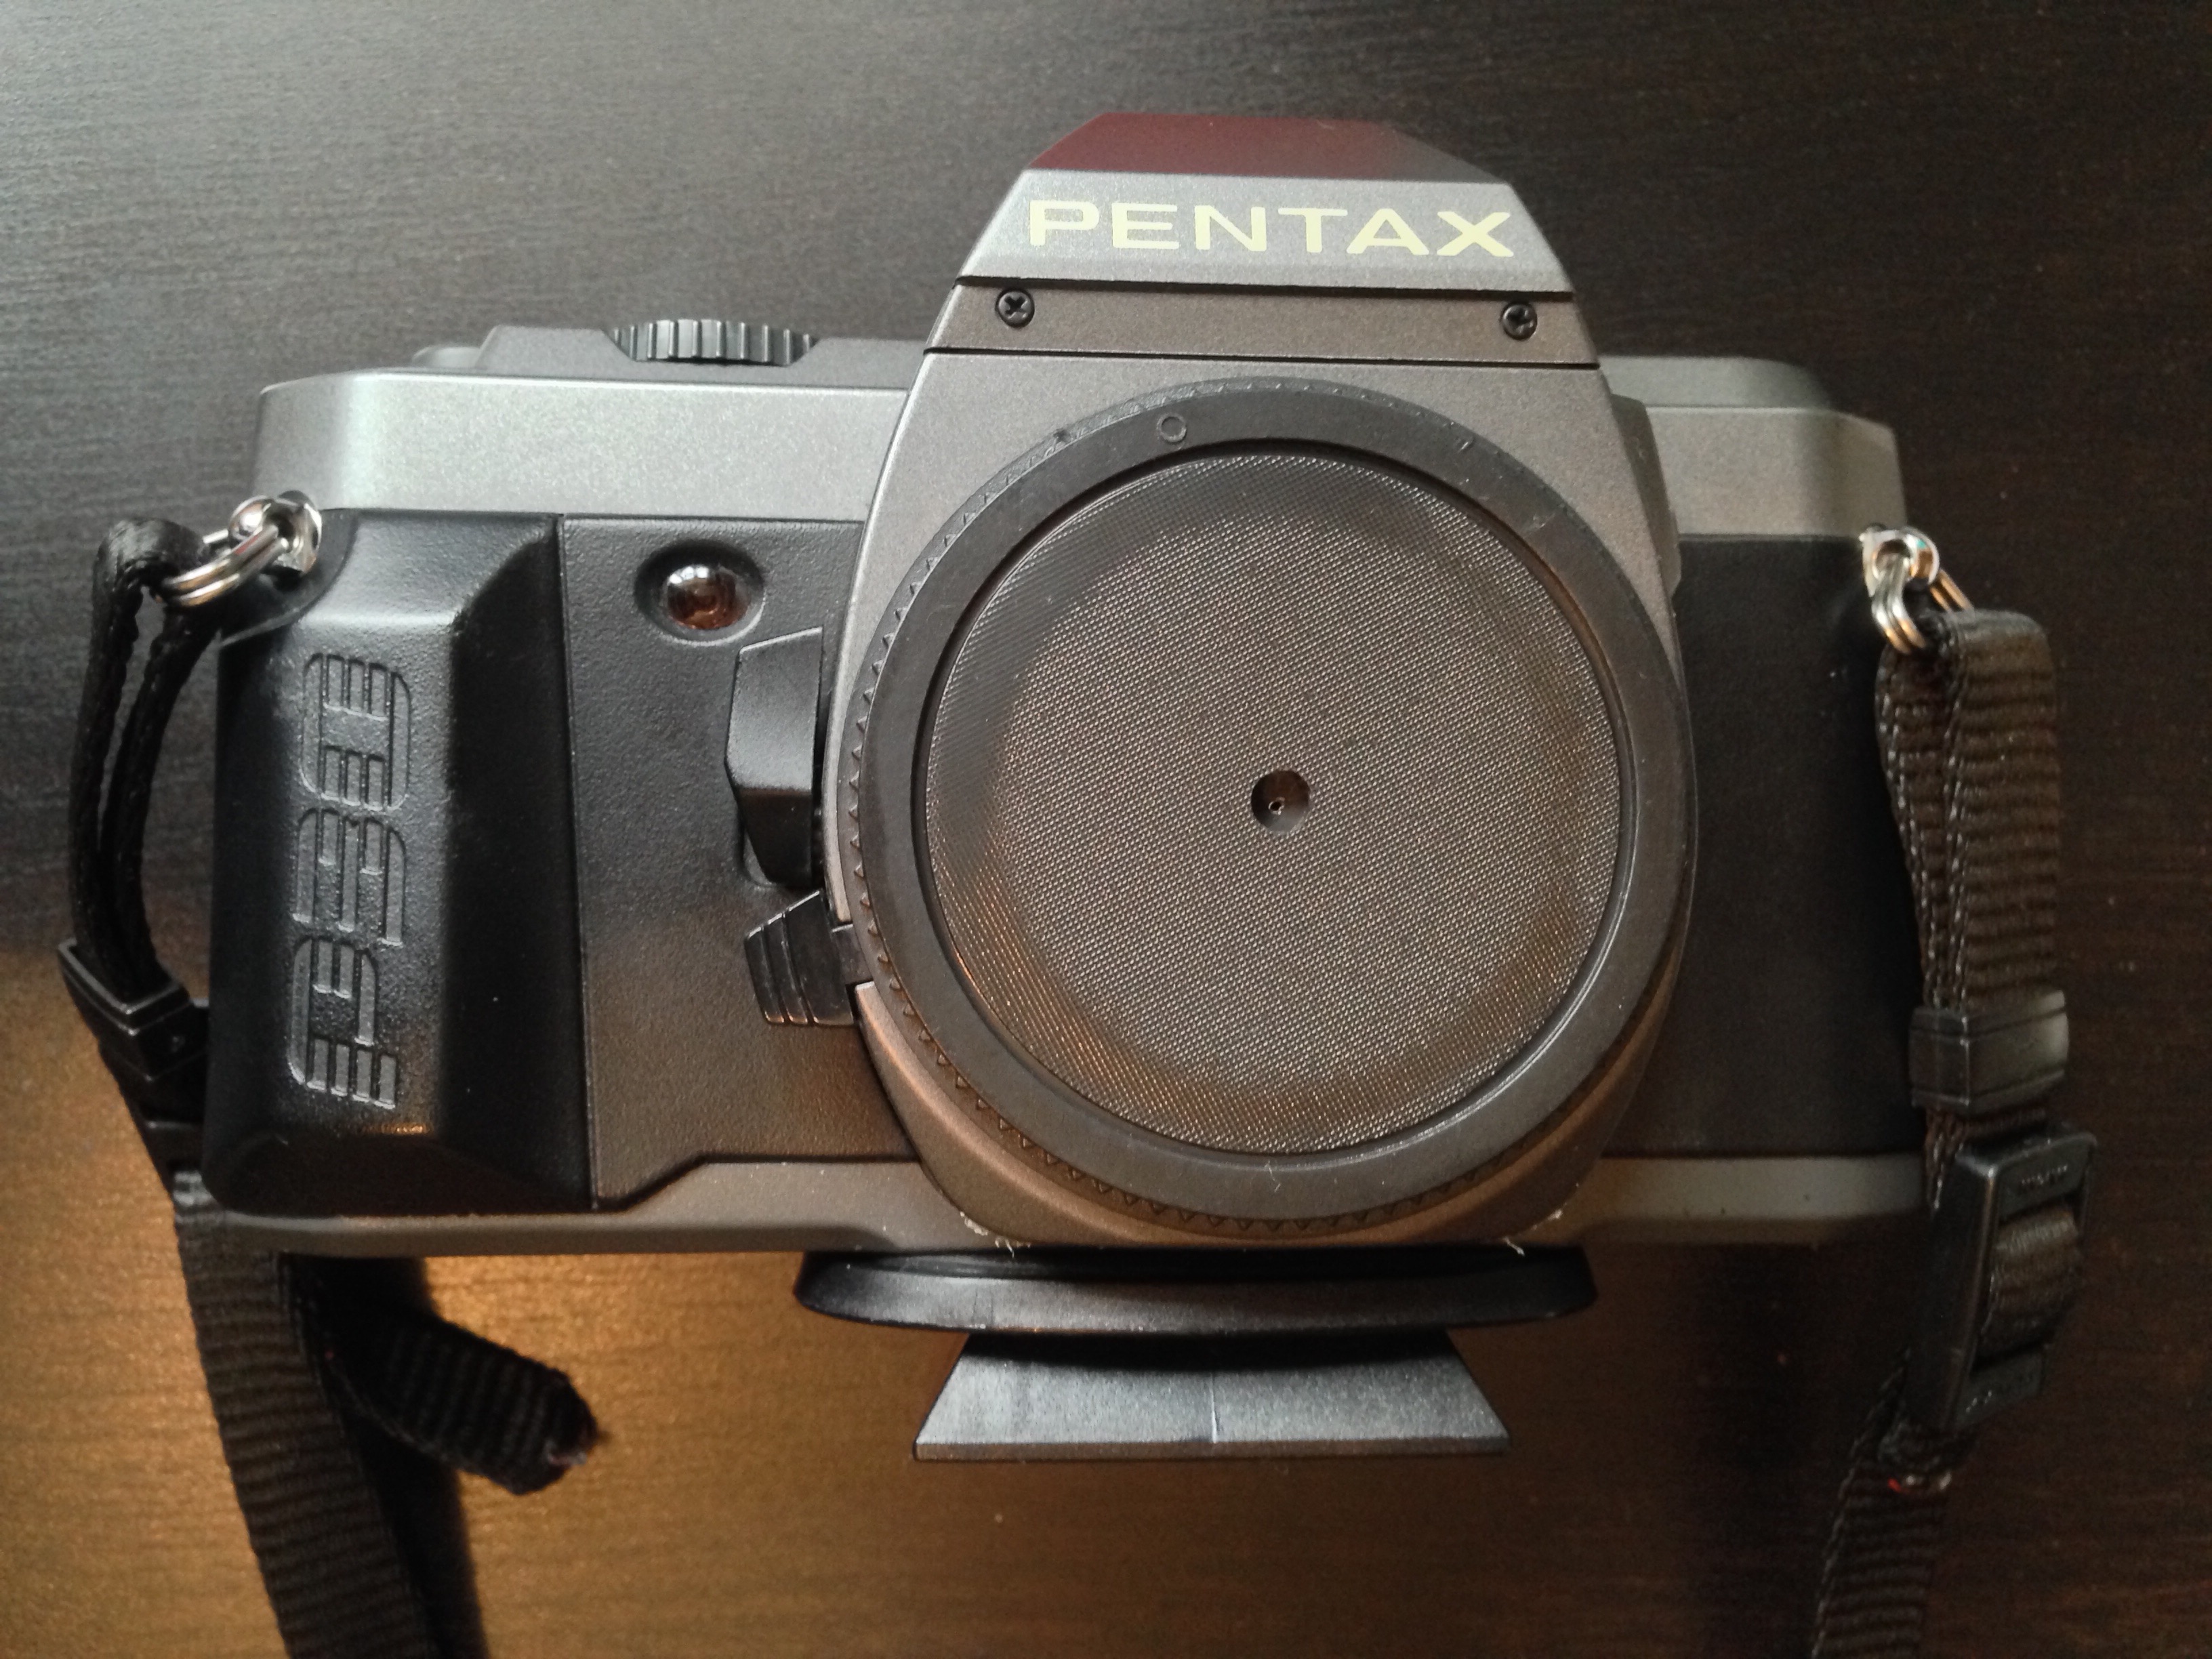 Making A Pinhole Attachment For An Slr